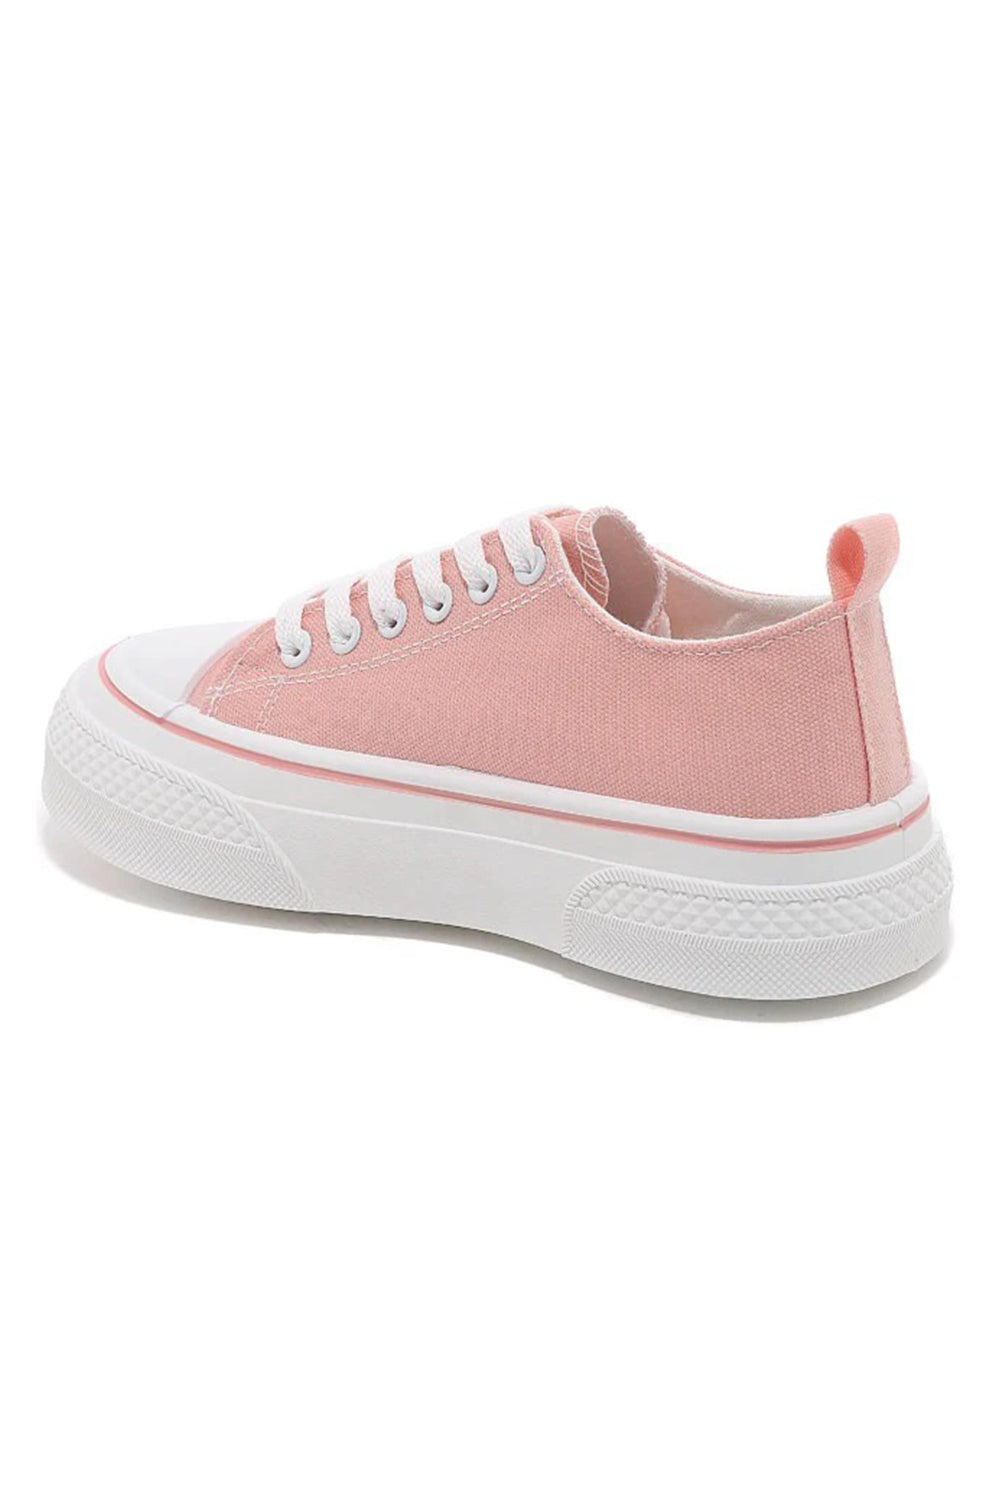 PINK CANVAS LACE UP TRAINERS